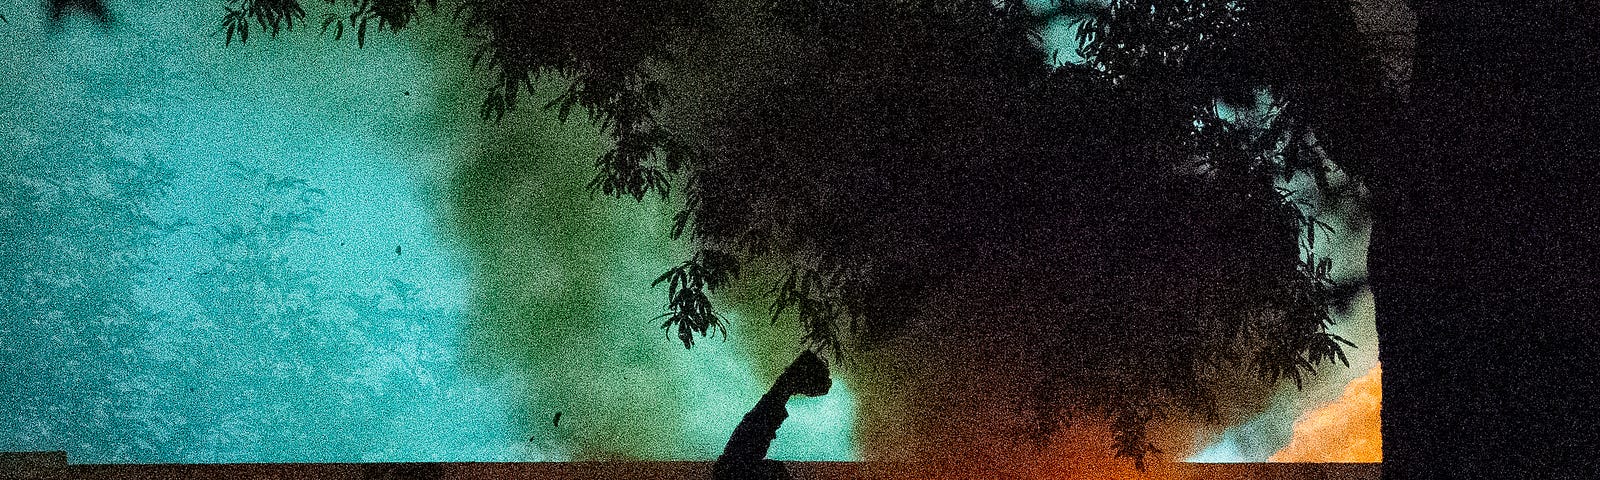 House on fire at night, a silouette of someone in front of the house with fist in the air. A large tree is in the foreground.